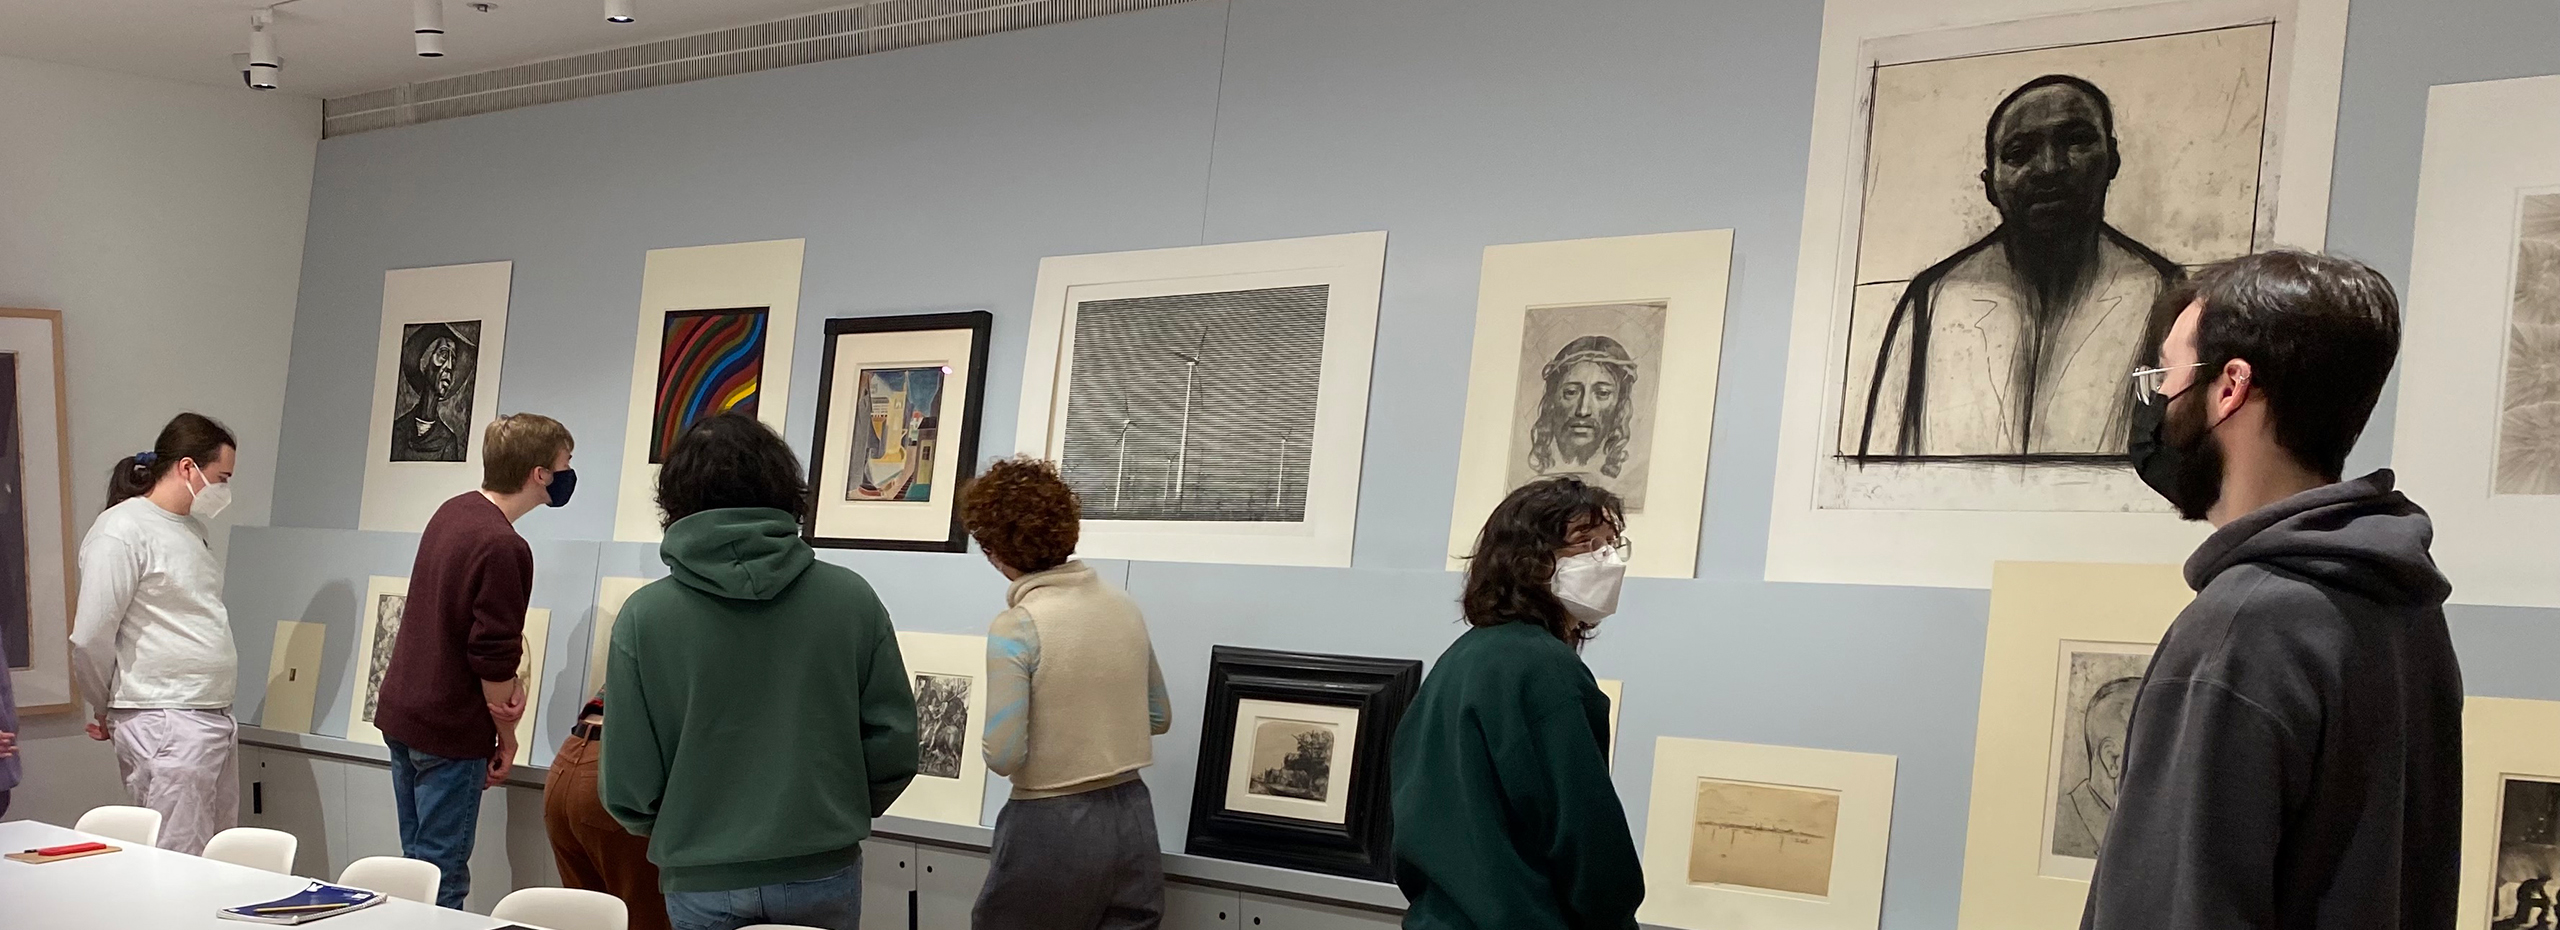 Masked students gather in a study gallery with artworks on the wall and a table